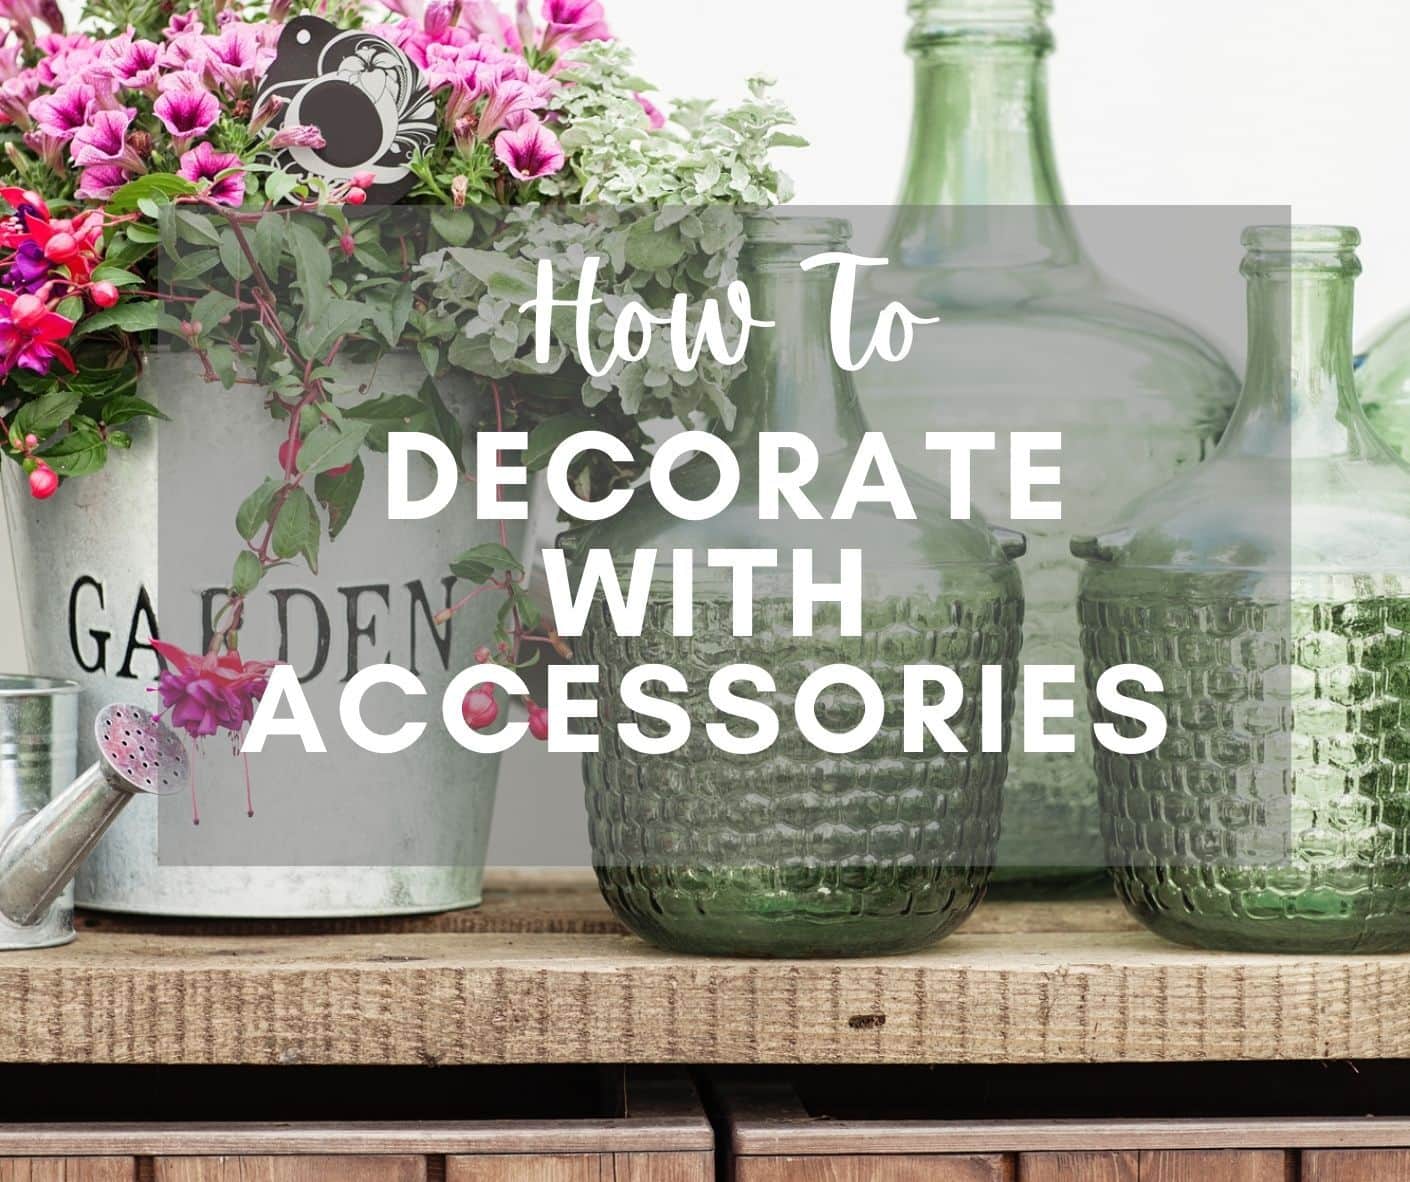 How to accessorize your home